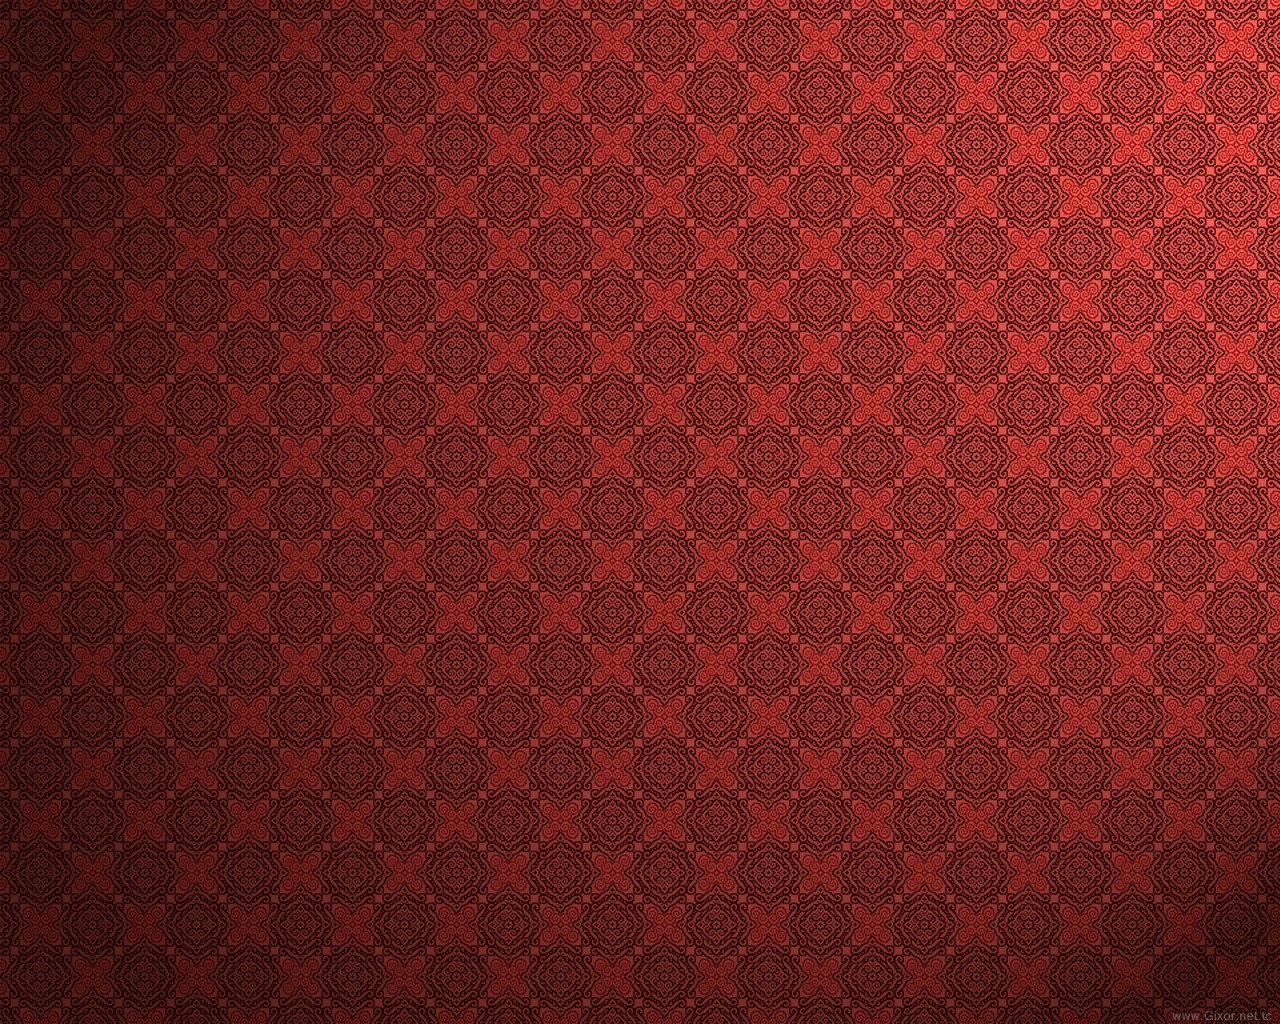 General 1280x1024 texture pattern red red background digital art watermarked